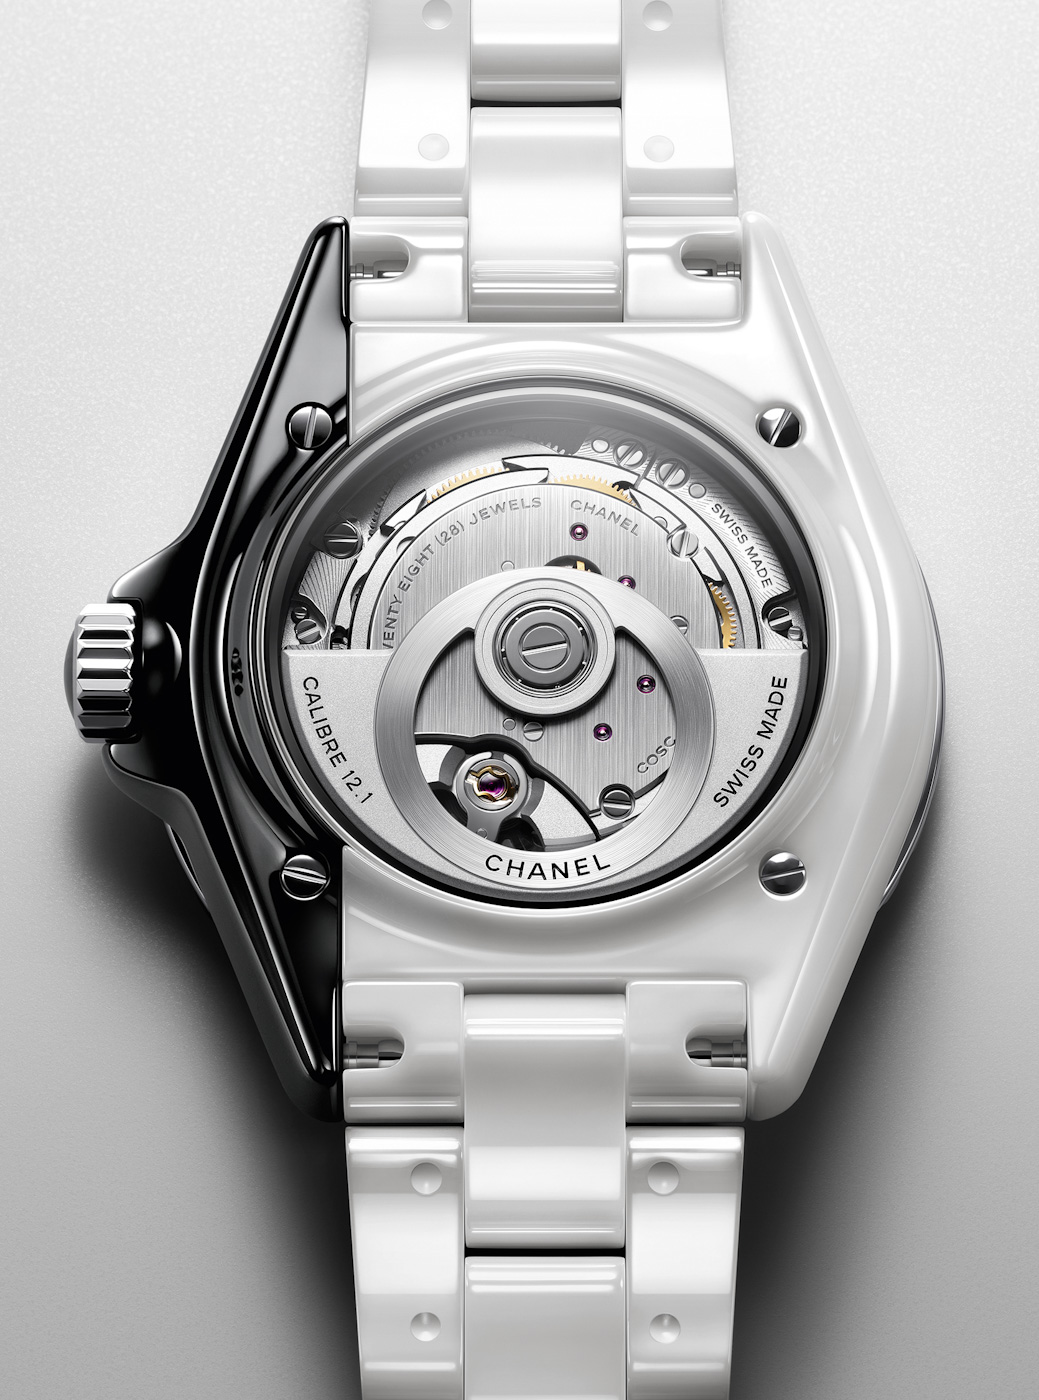 Chanel Debuts The World's First Fully Two-Tone Ceramic Watch With